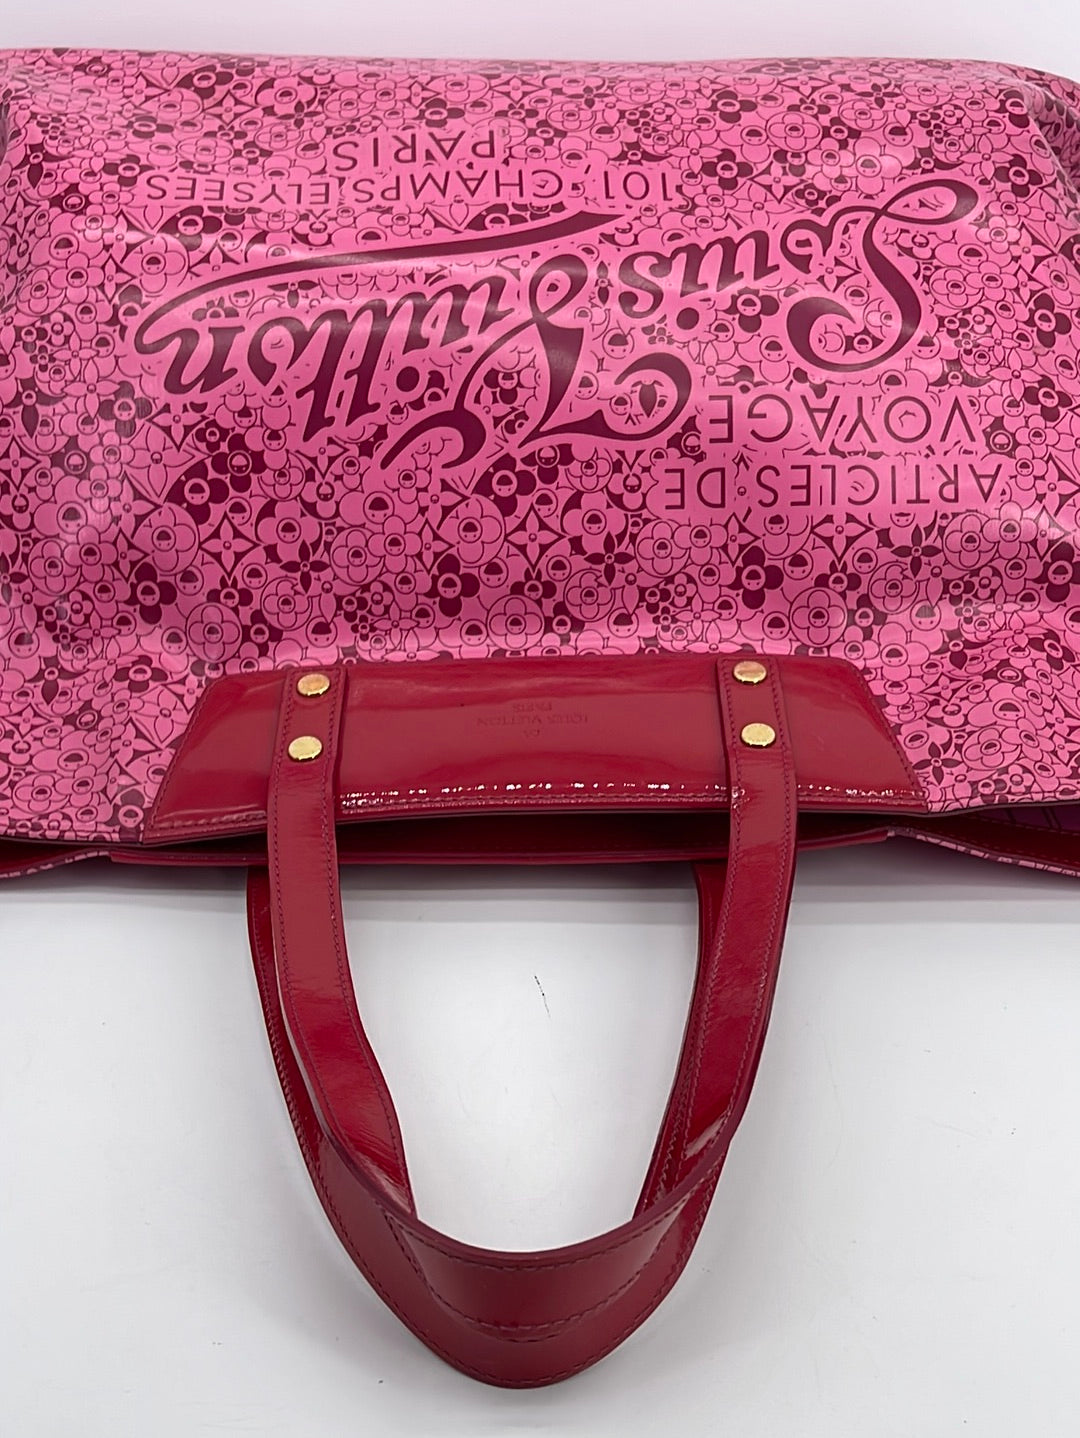 Cosmic Blossom Voyage Tote, Louis Vuitton (Lot 125 - The Signature Spring  AuctionMar 13, 2021, 9:00am)